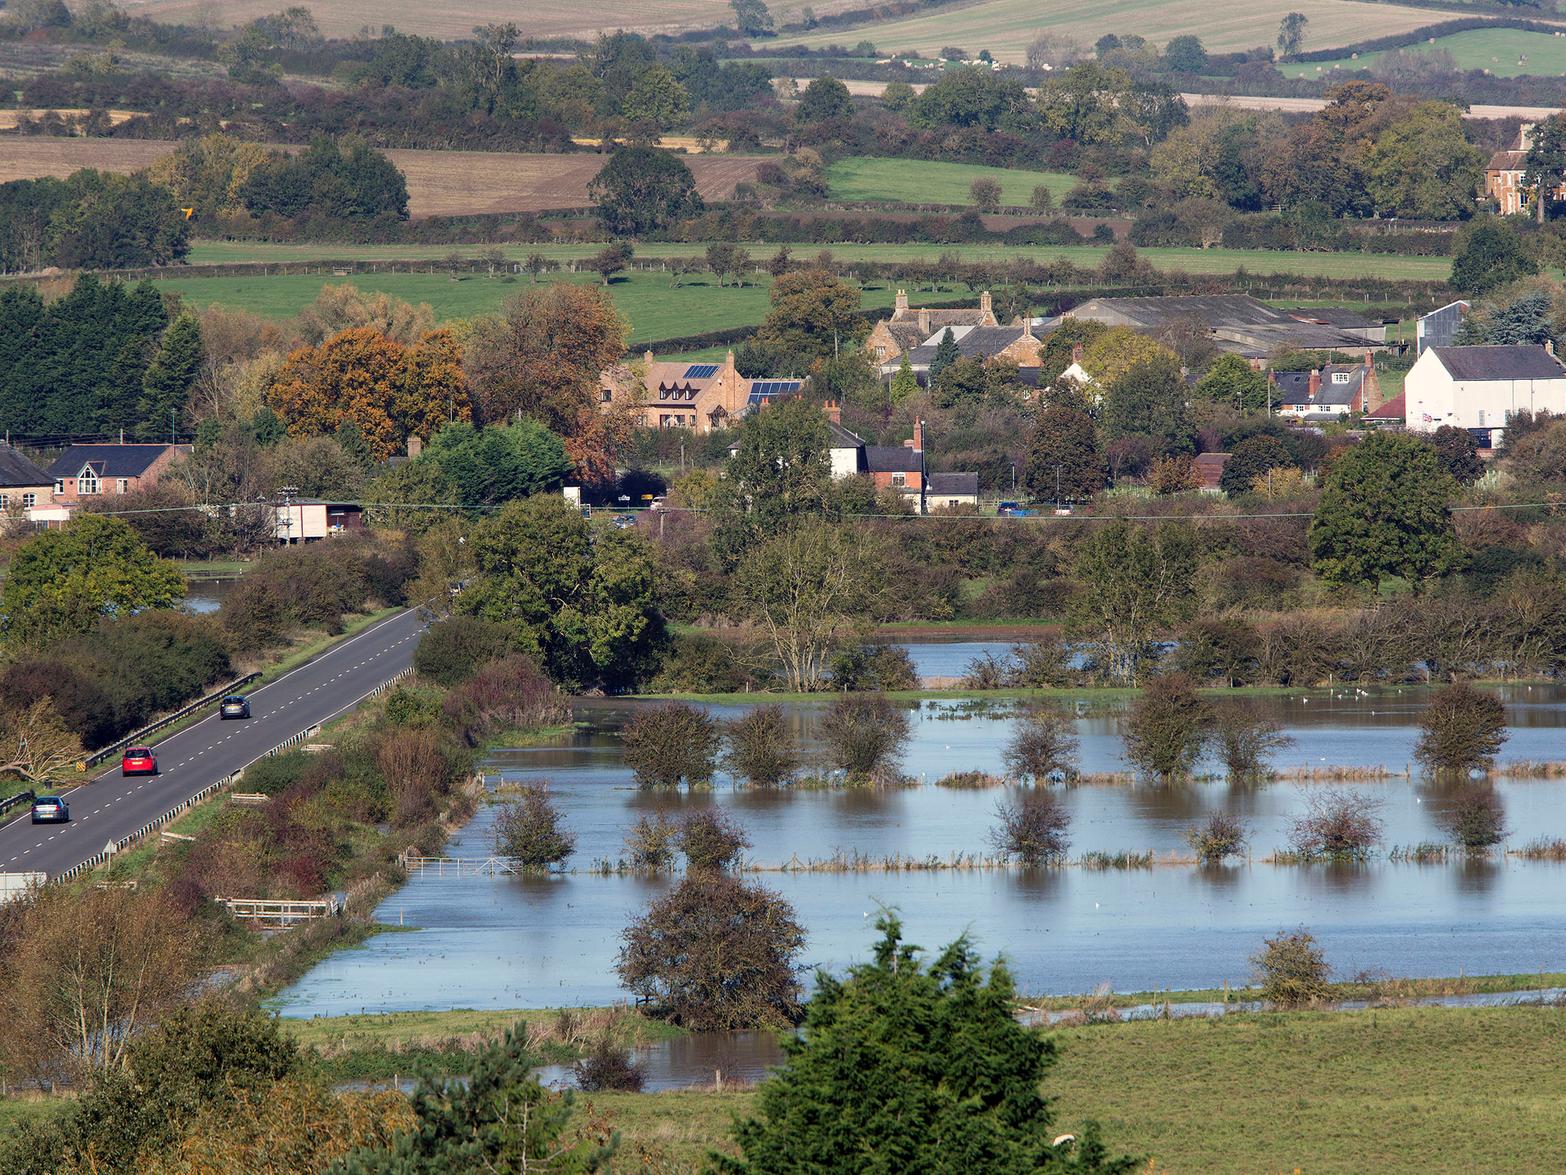 There was also flooding further north near Caldecott, seen in this photo taken from Rockingham Church. The river Welland had burst its banks.